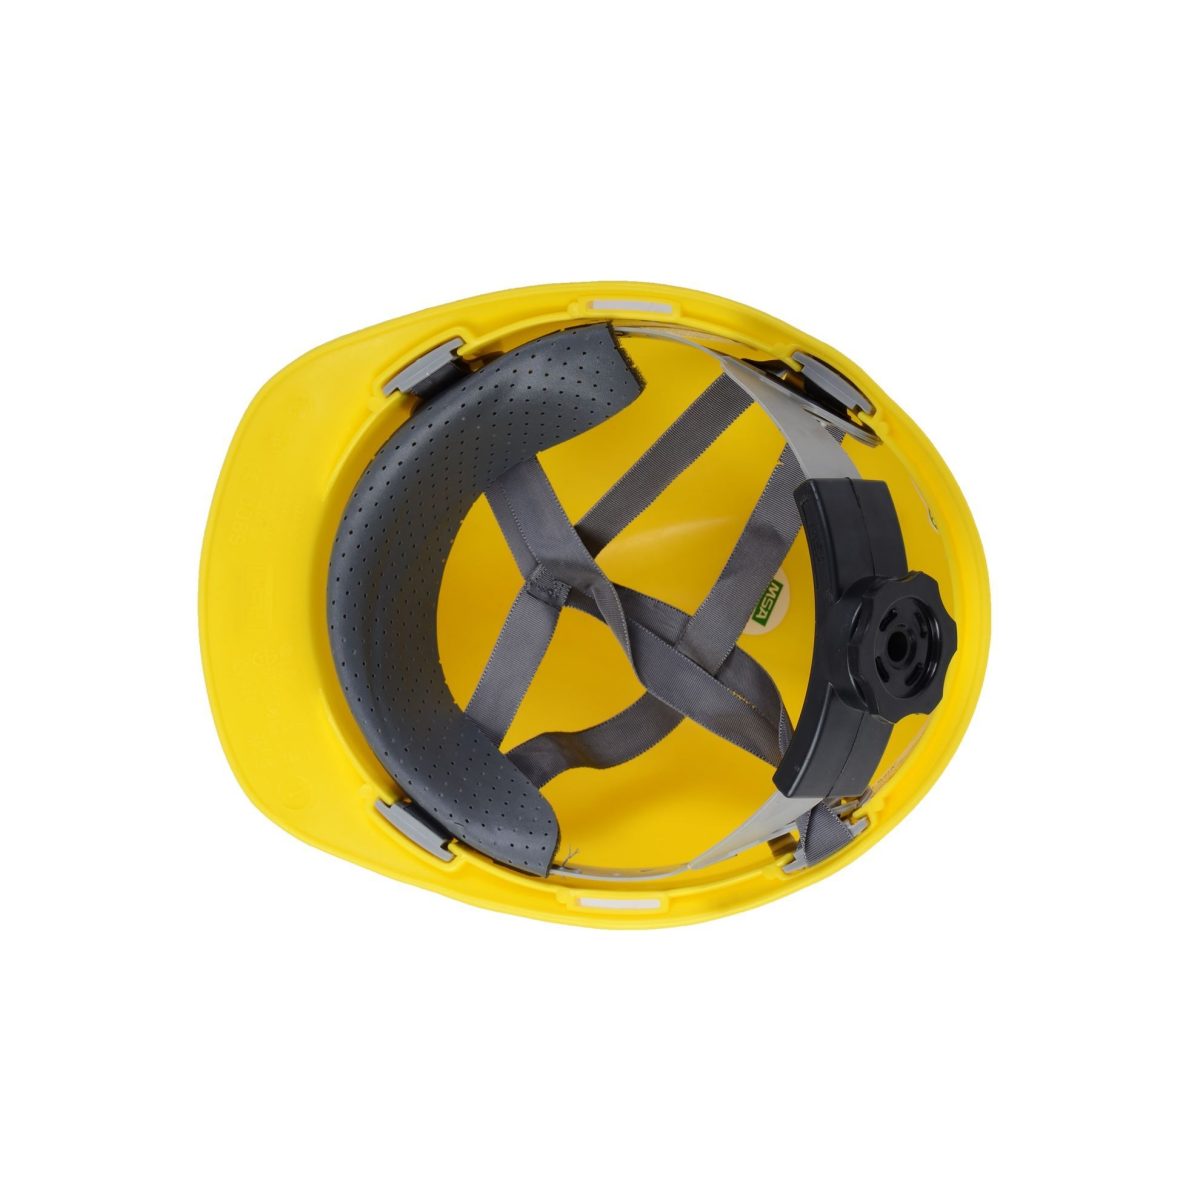 Adjustable Safety Helmet with Wheel Rachet Type Yellow – For Construction labors & Earth Moving Operators Workers